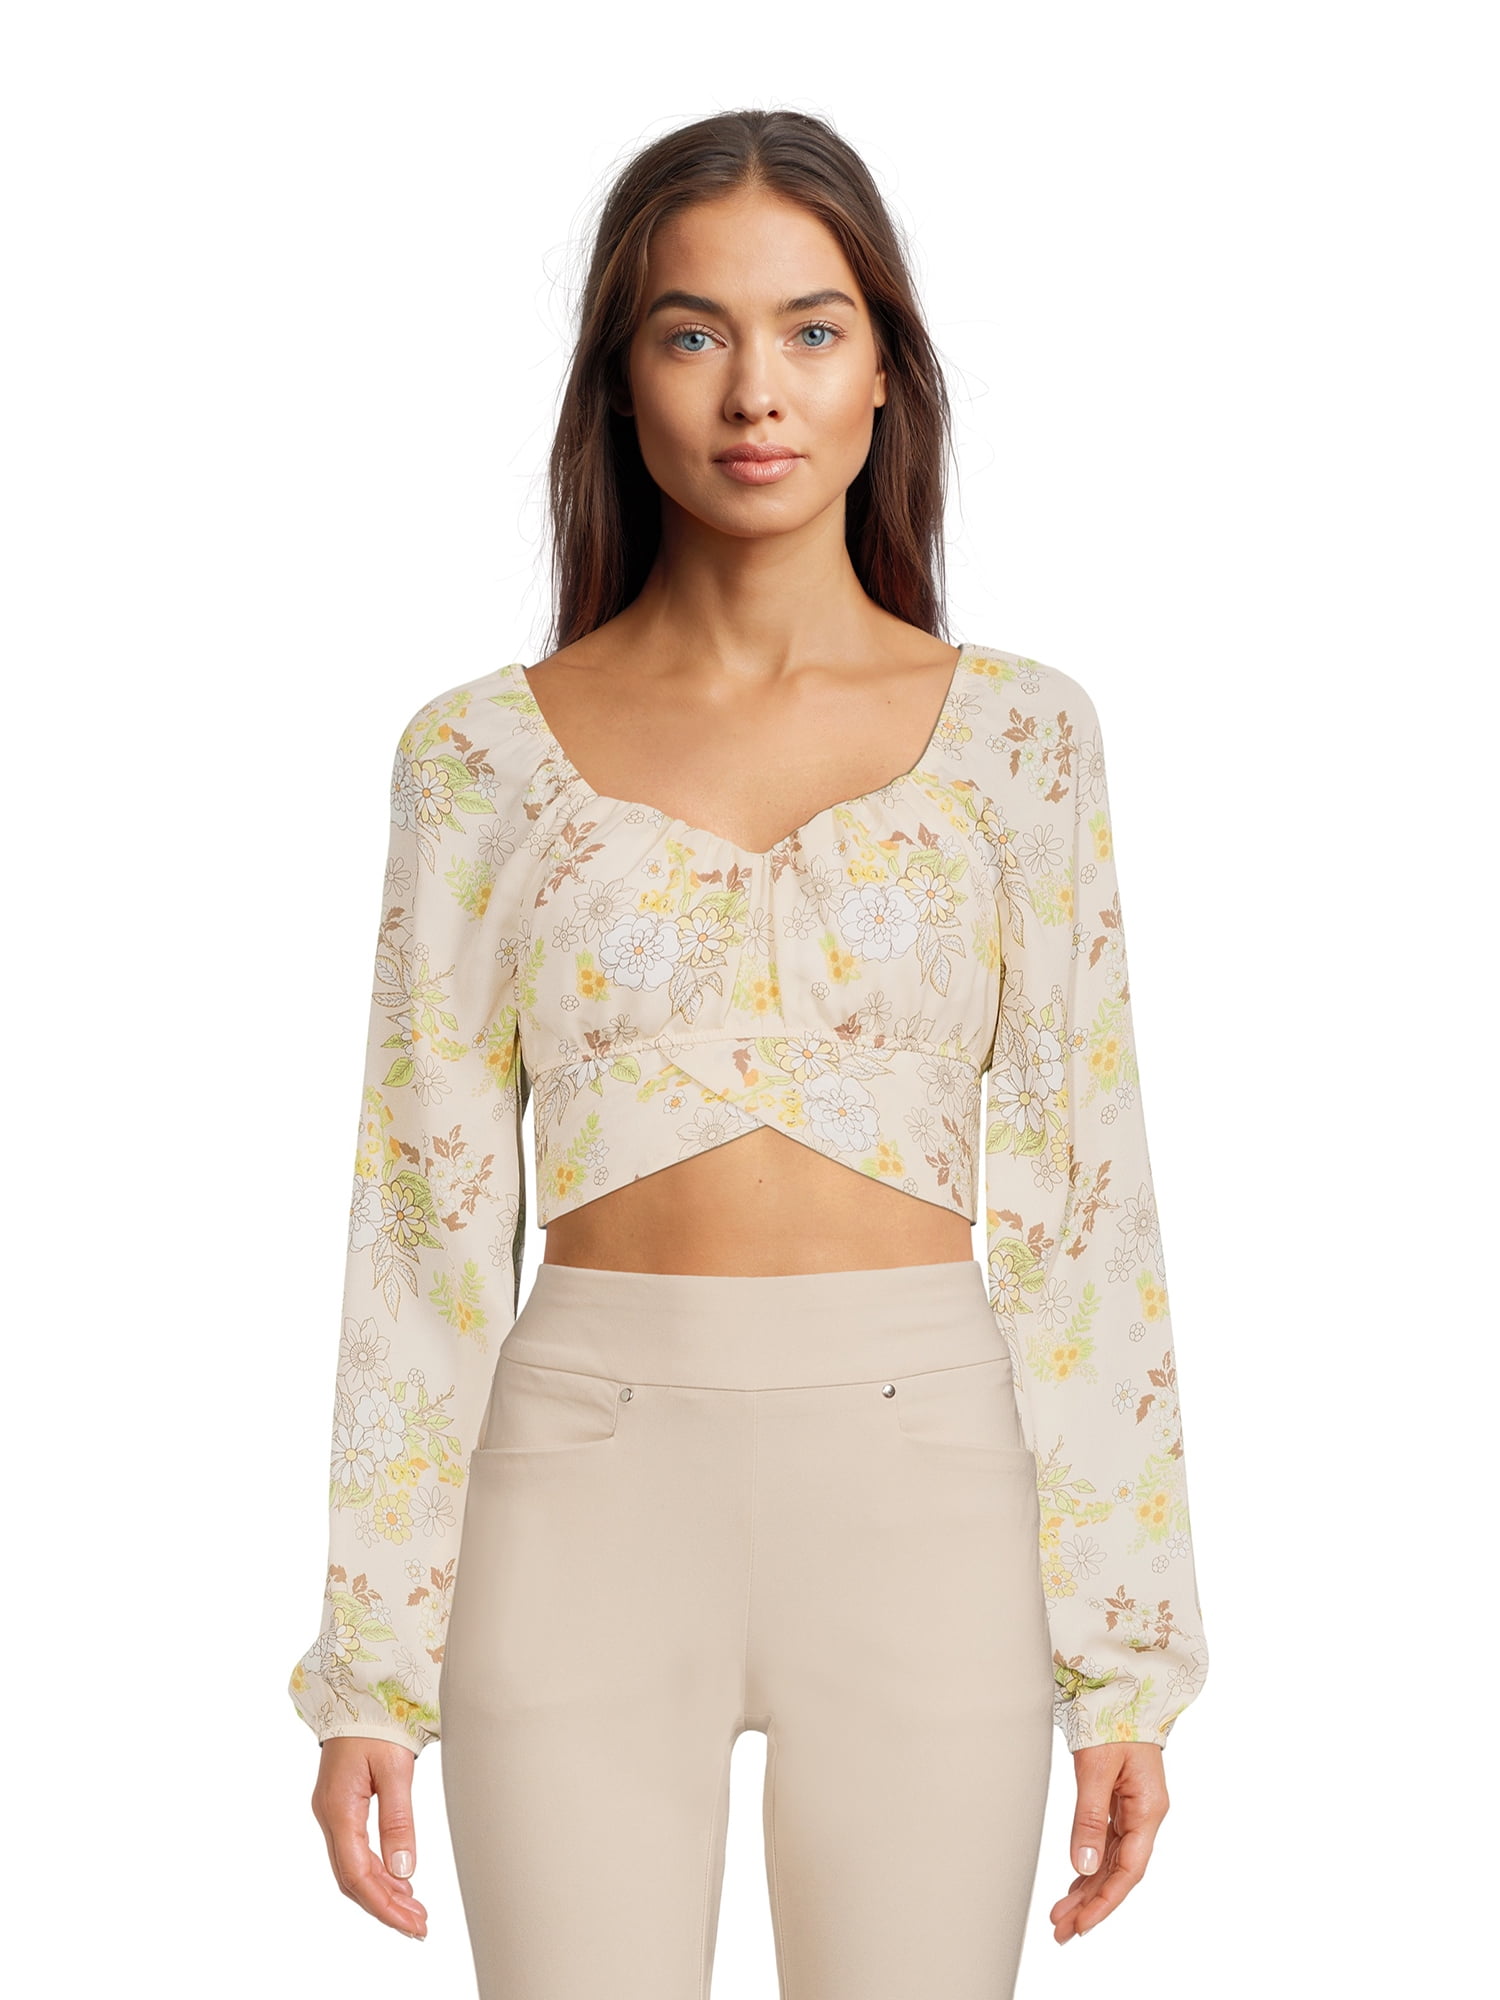 Madden NYC Junior's Cropped Back Tie Top with Long Blouson Sleeves, Sizes XS-XXXL